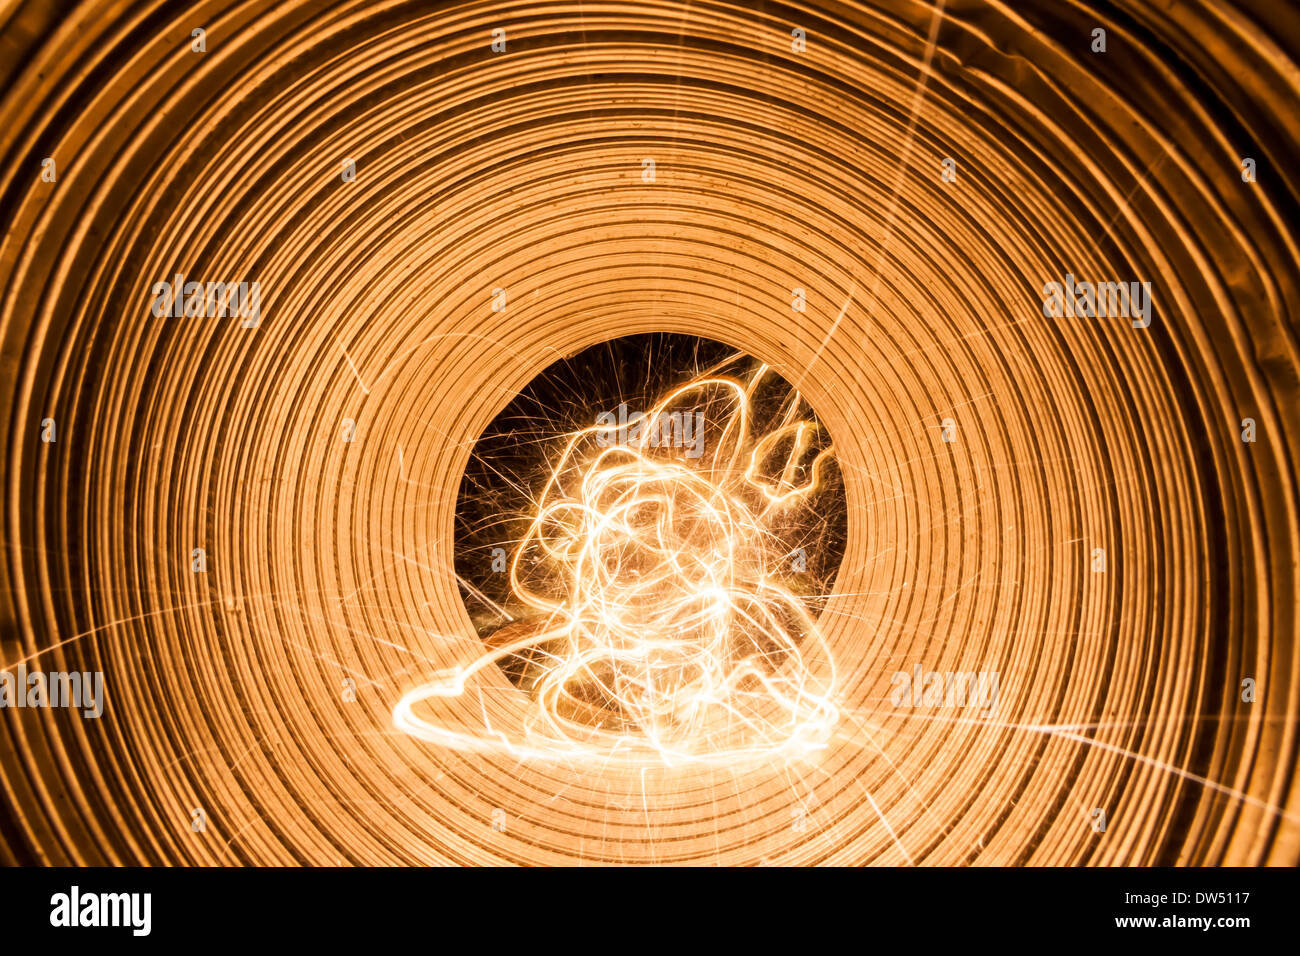 Random electric light trails in a pipe that shines in light Stock Photo